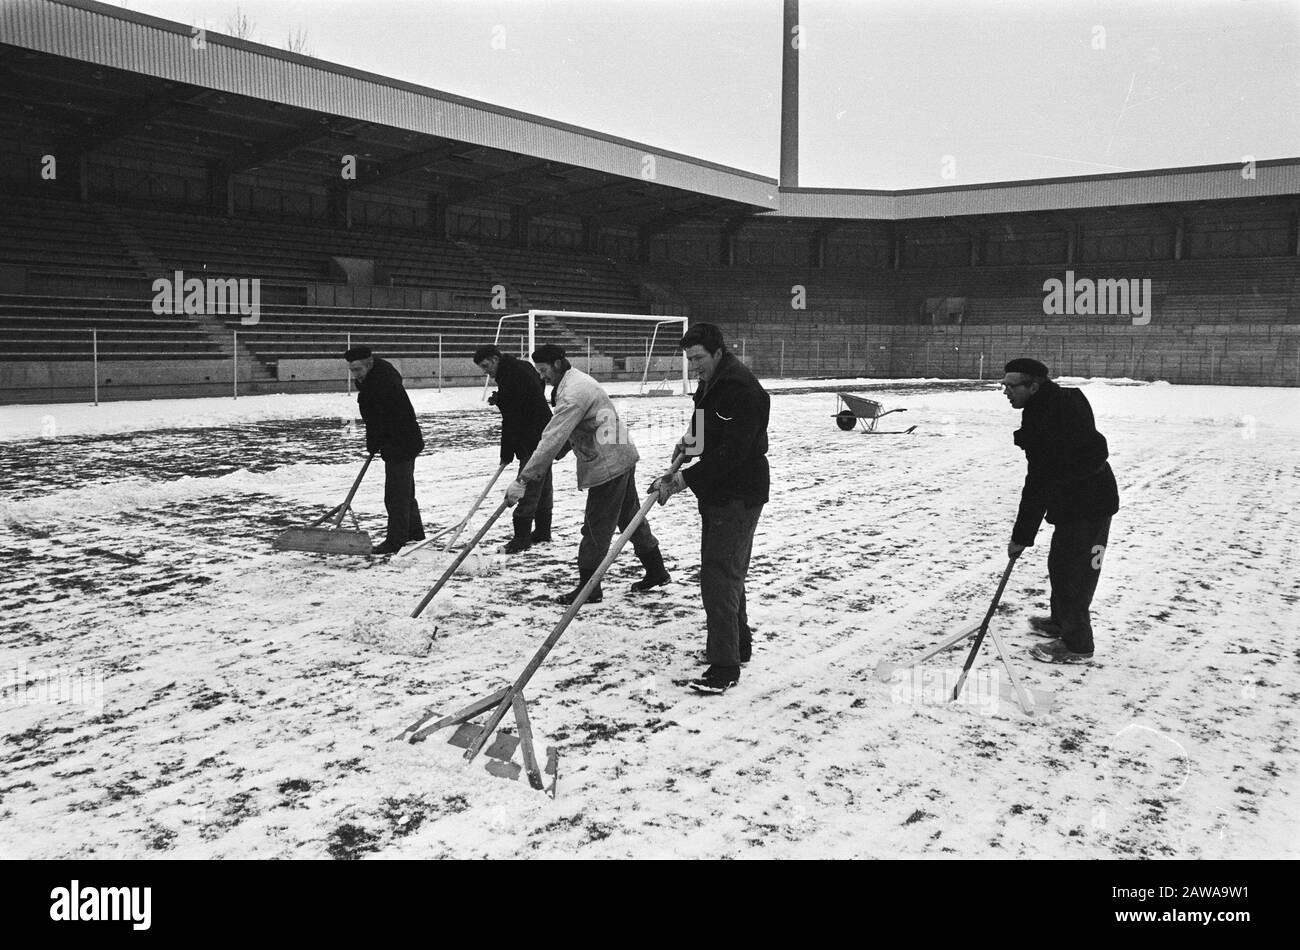 PSV stadium is snow cleared for football match against description: Men with snow blades Date: March 8, 1971 Location: Eindhoven, Noord-Brabant Keywords: snow, sports stadiums, football Institution Name: Vorwarts Berlin Stock Photo